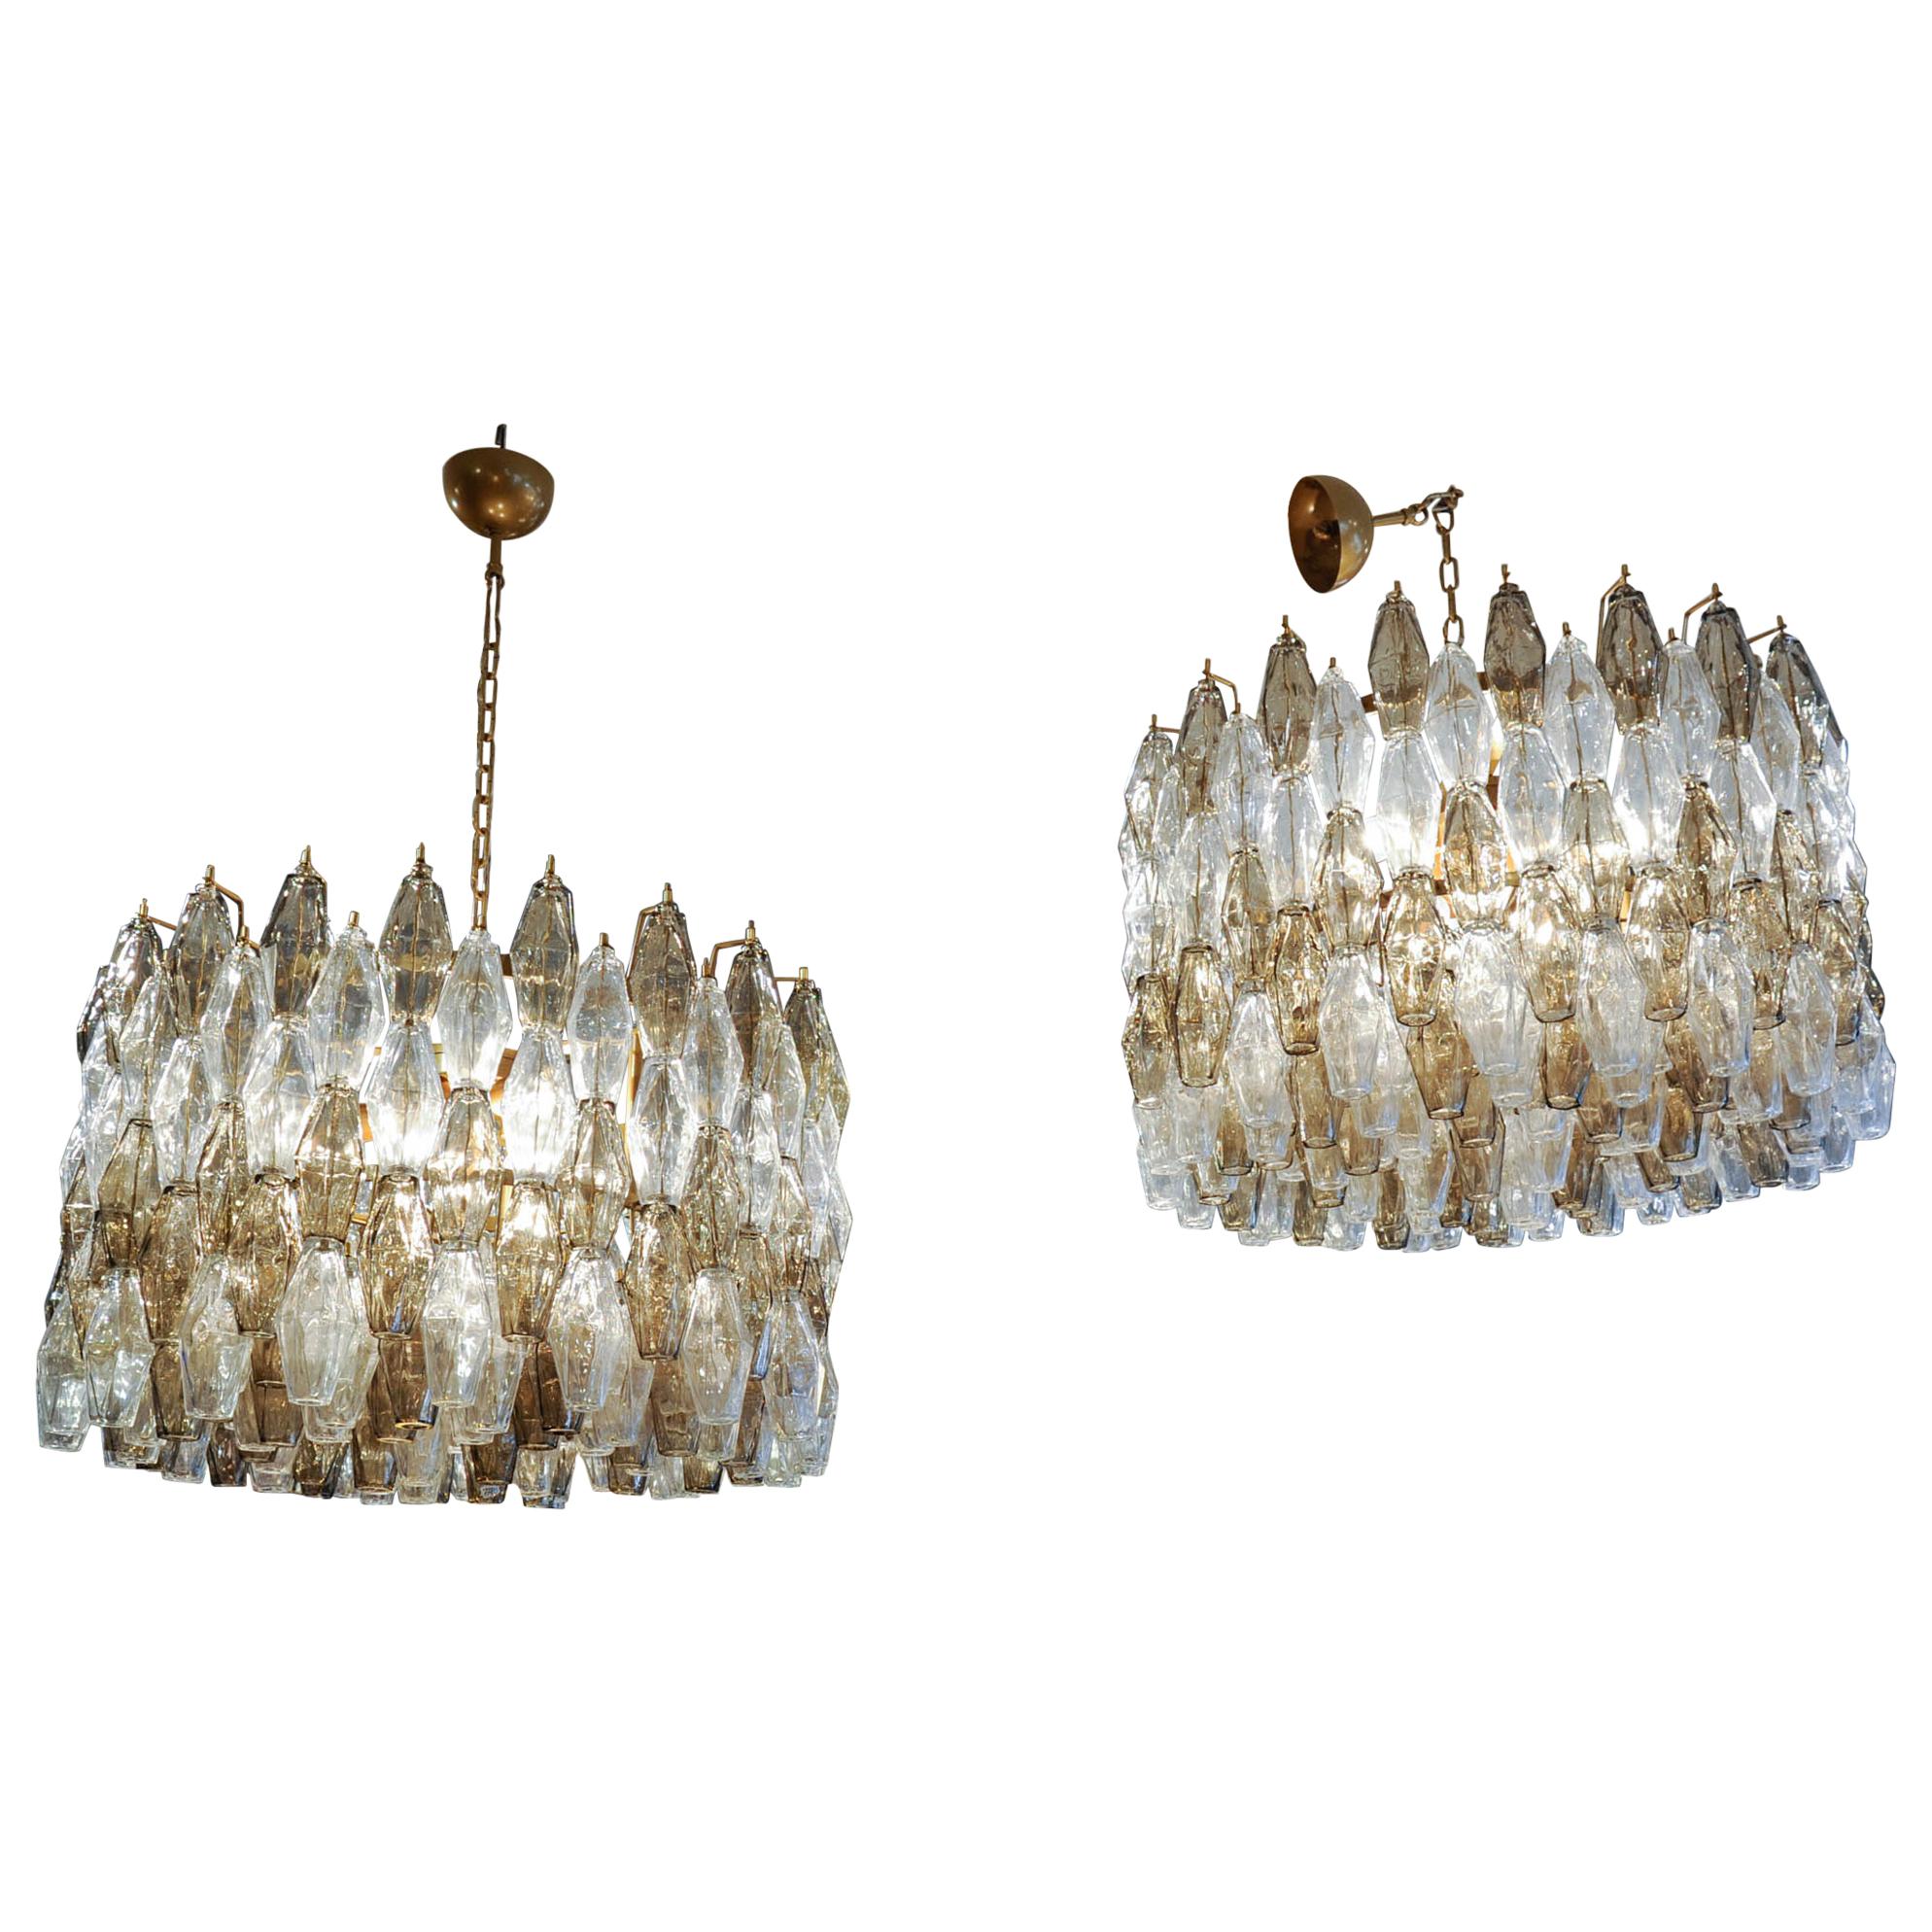 Wonderful Pair of Chandeliers Venini at cost price.